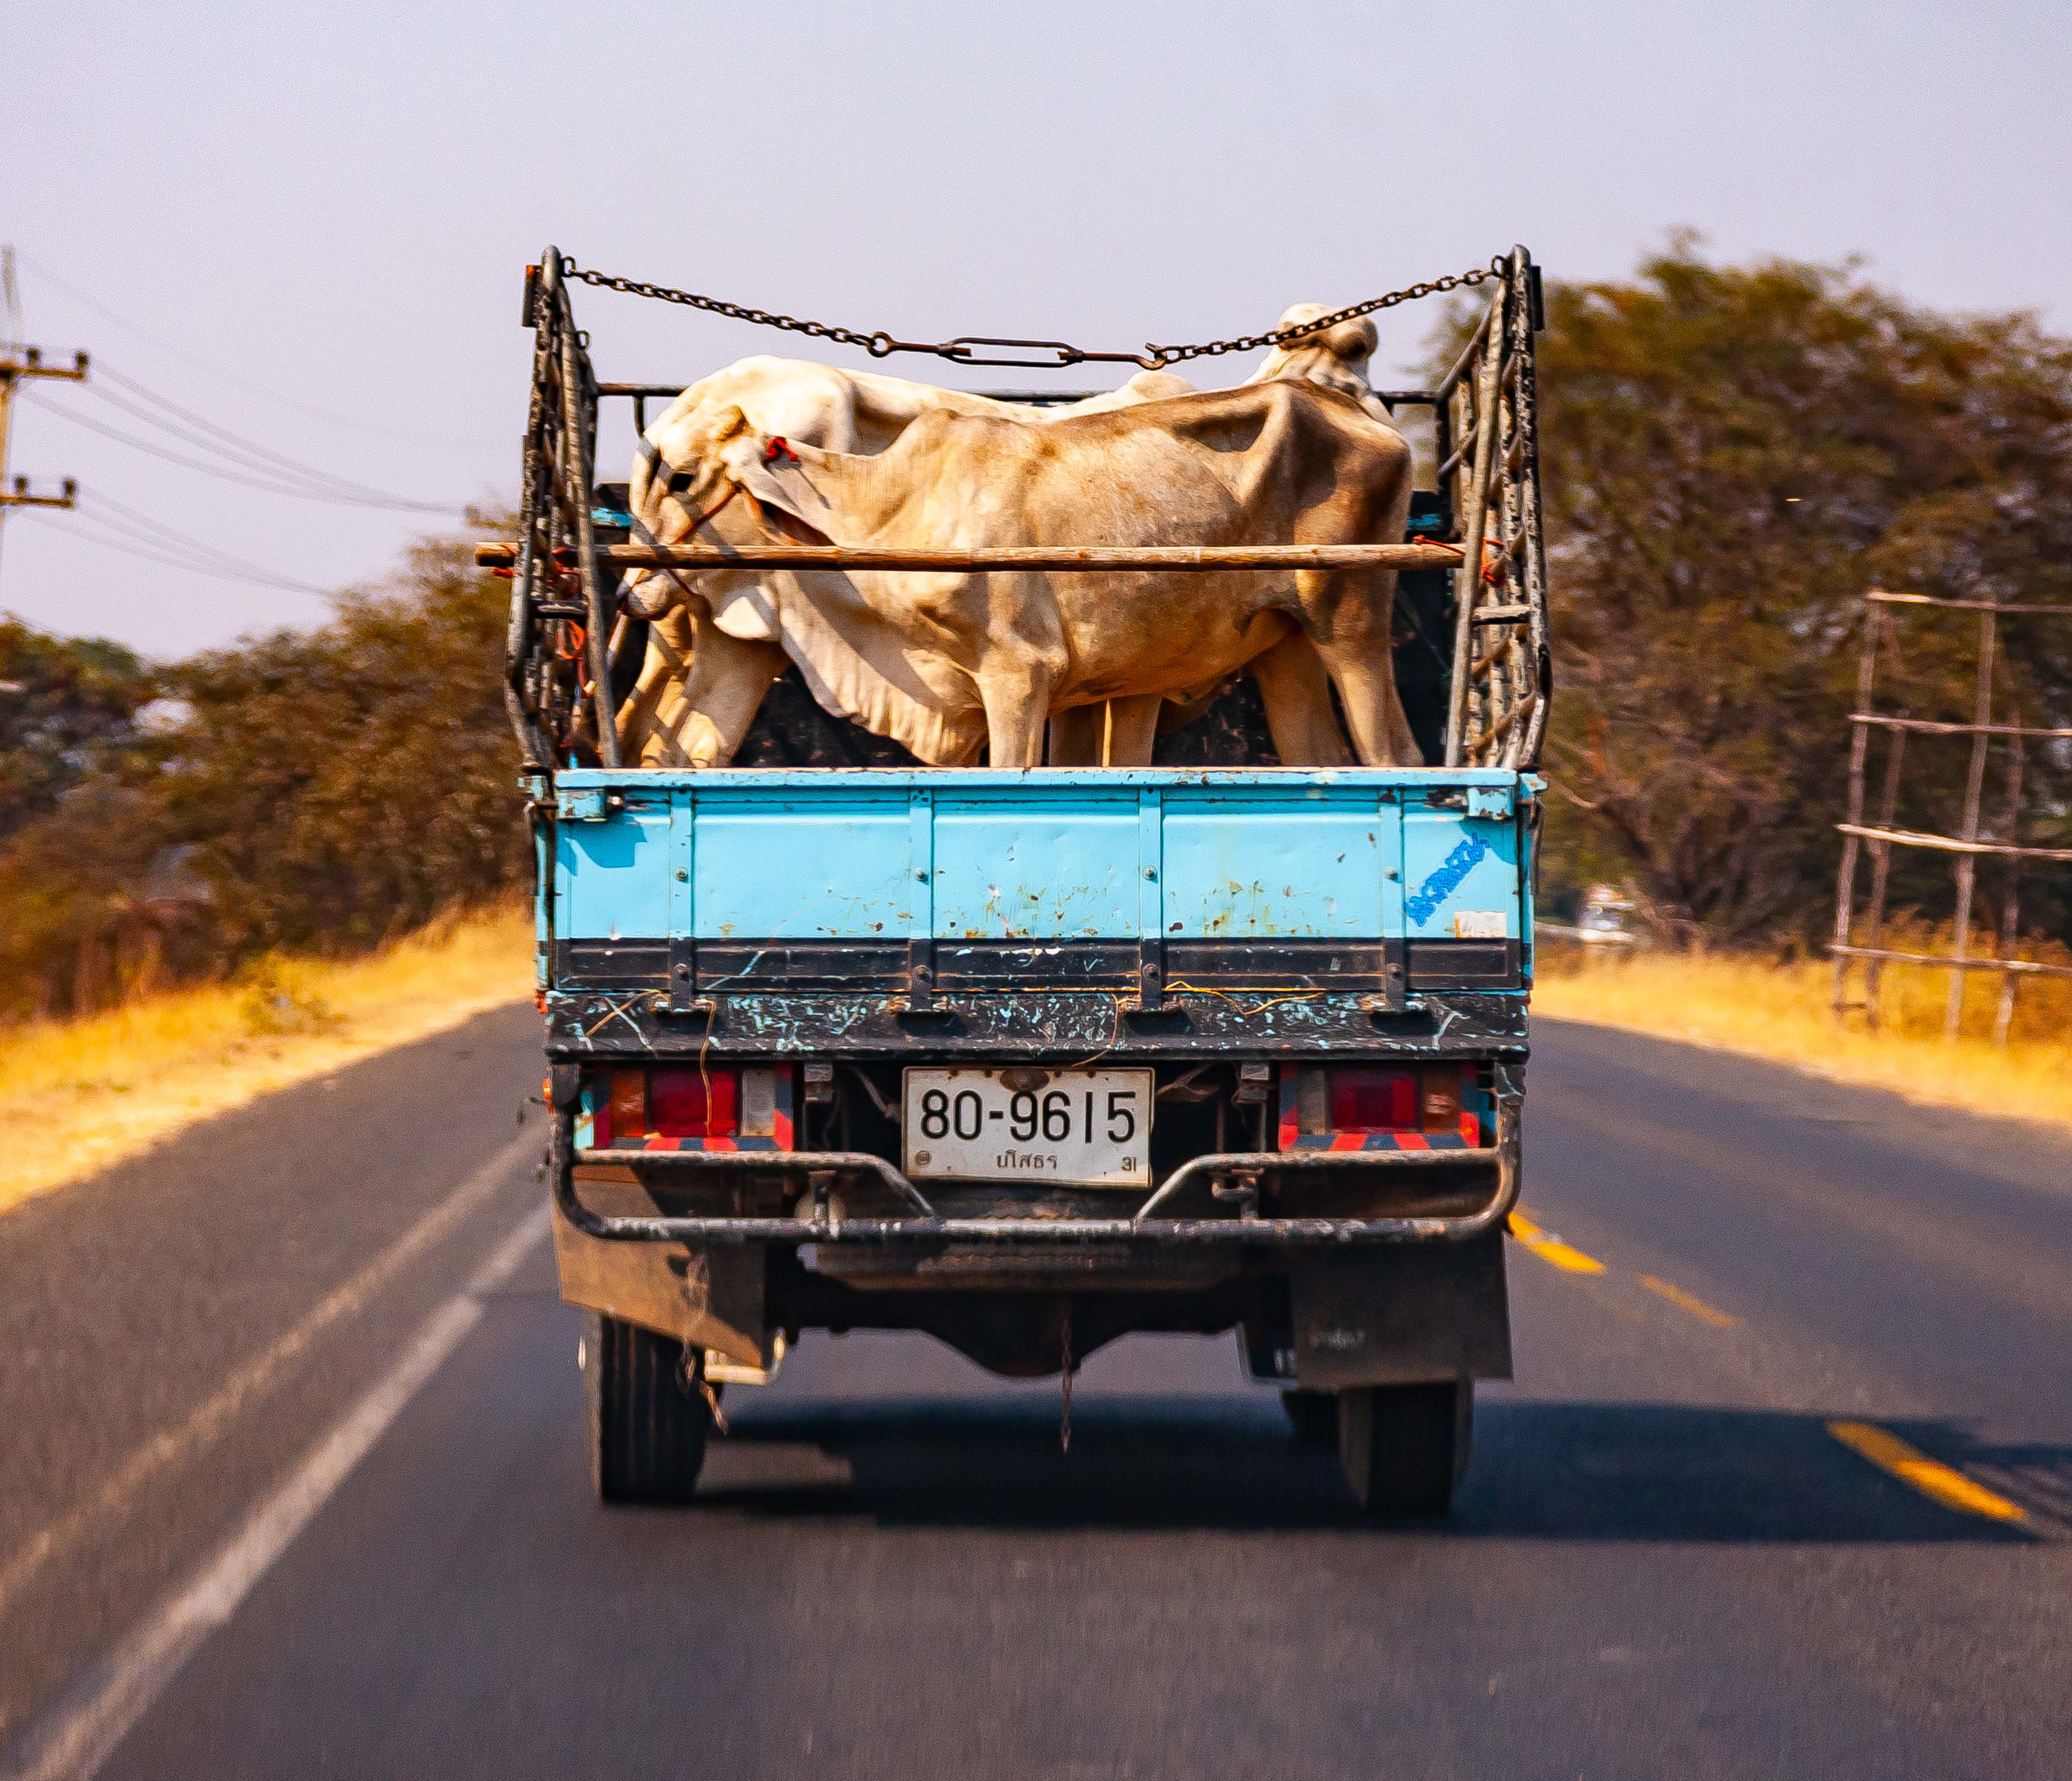 Thailand, Yasothon Prov, Cow In Truck, 2008, IMG 0582